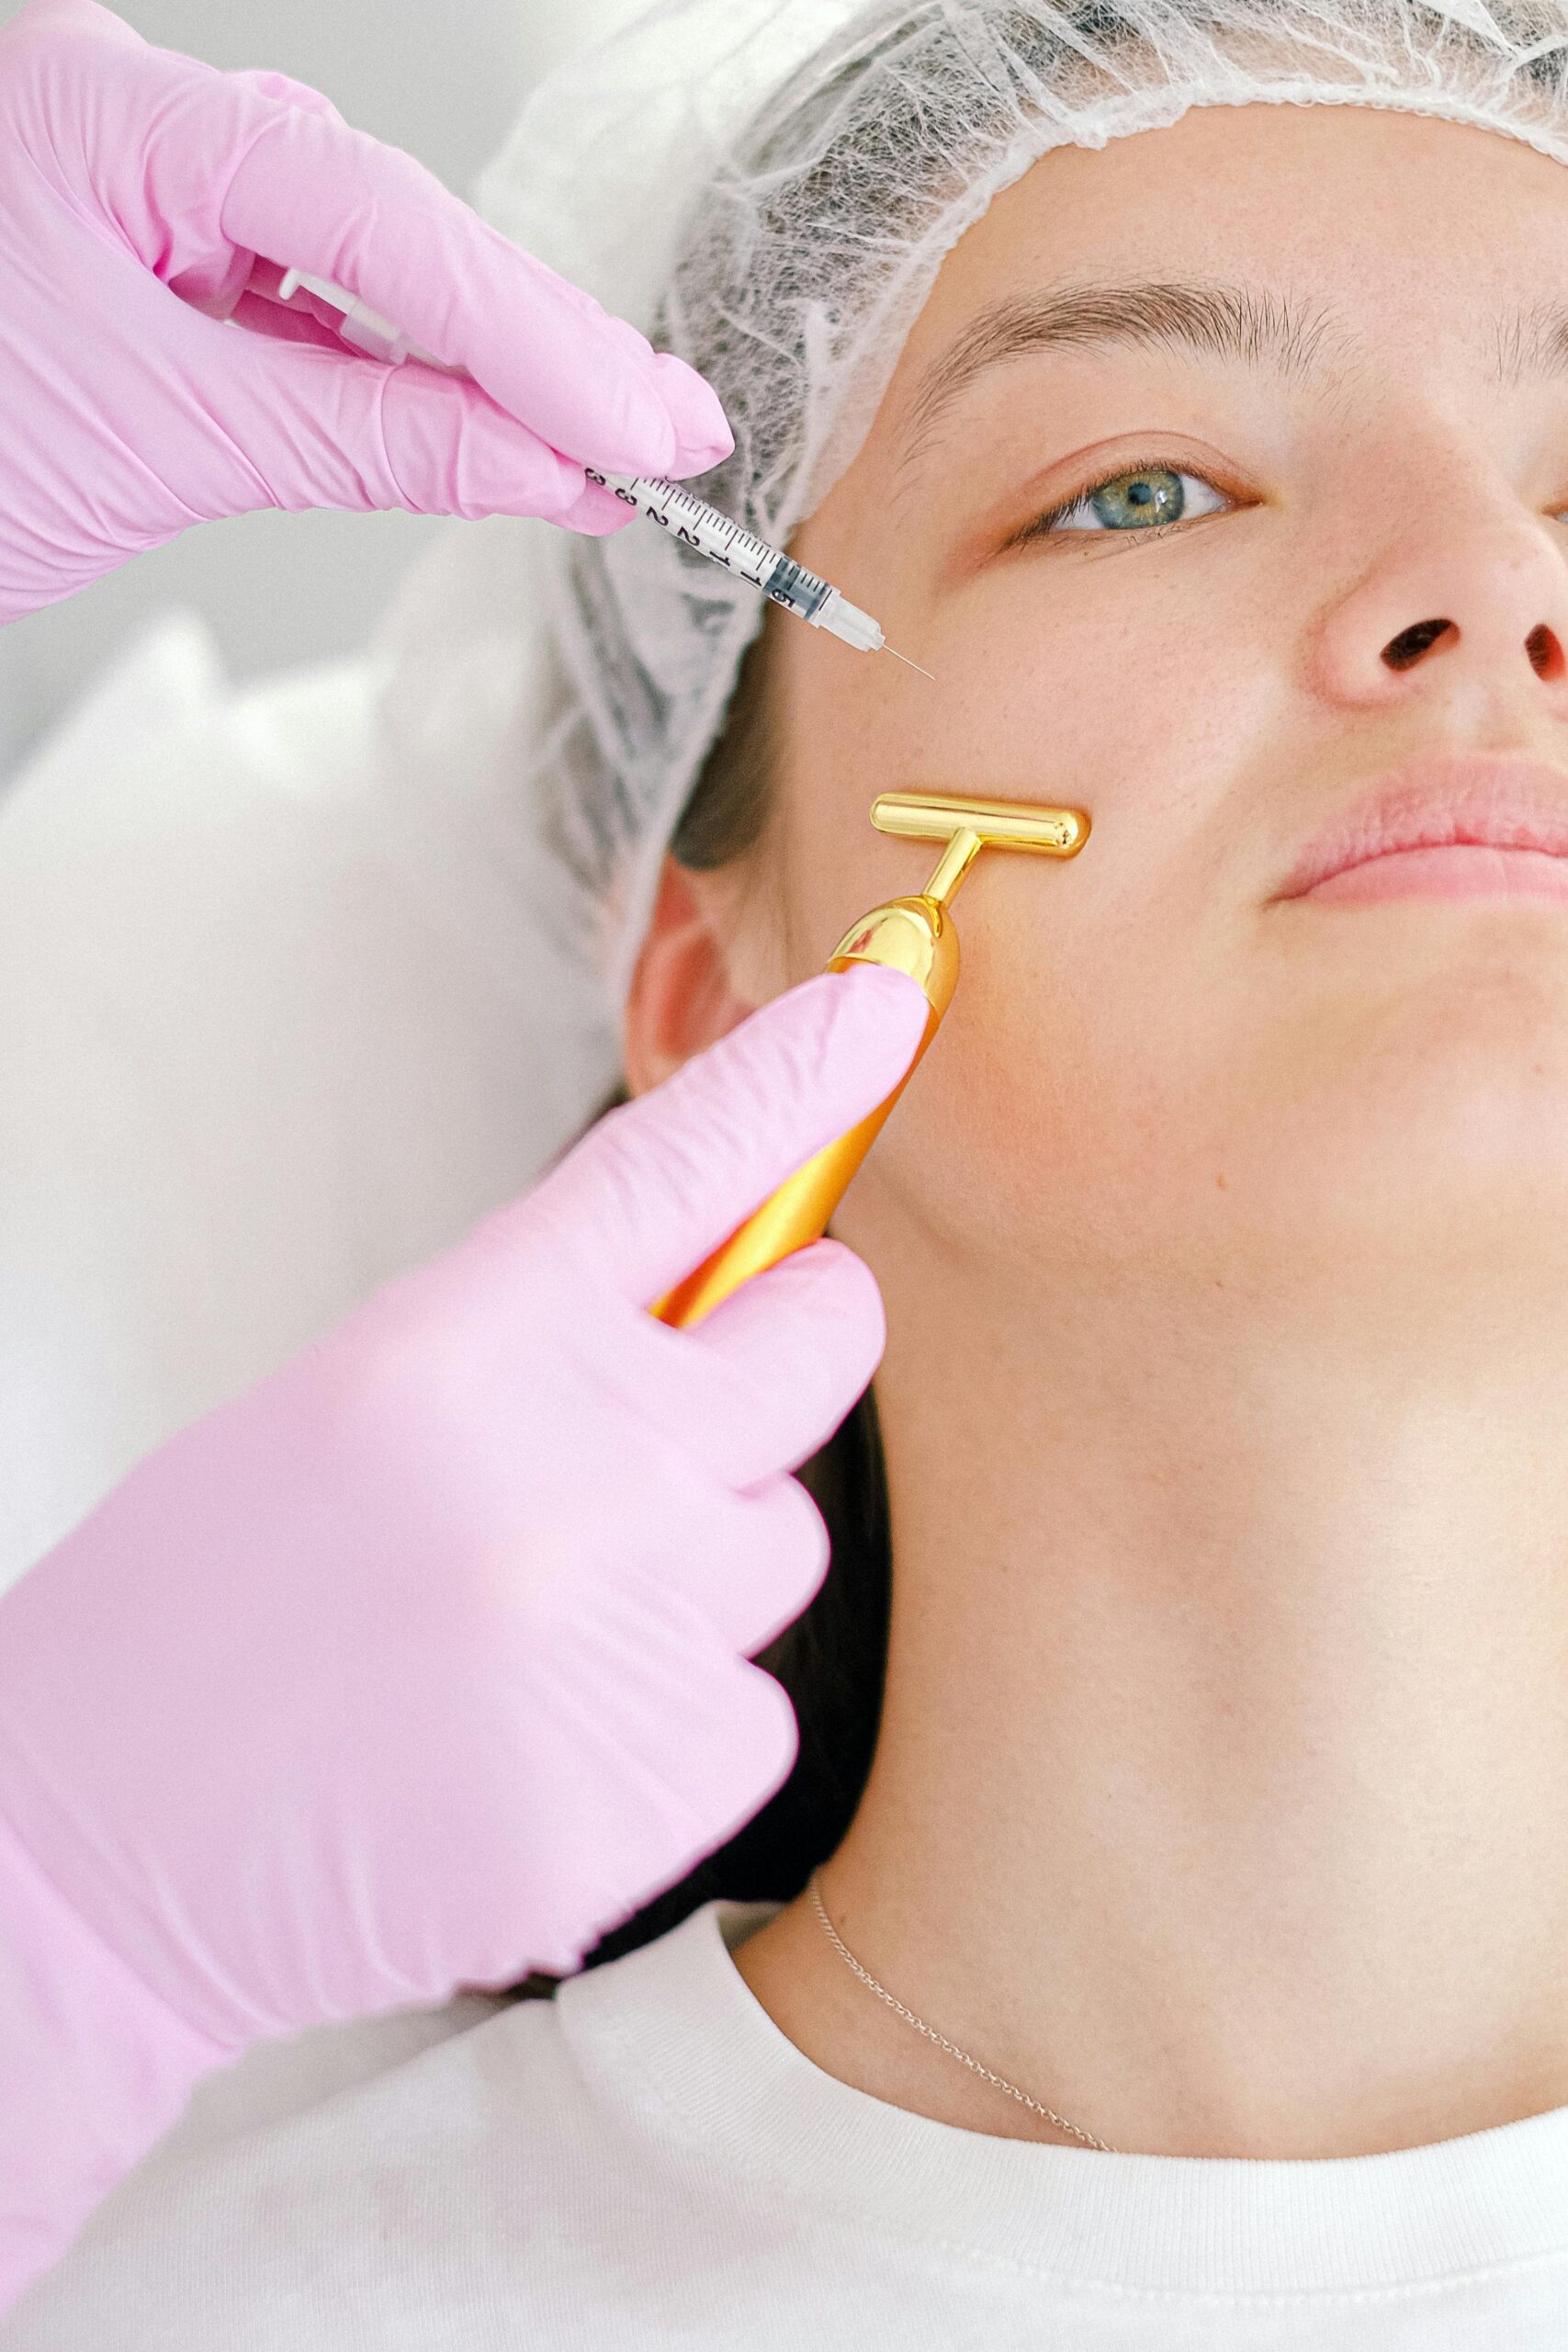 What You Should and Shouldn't Do After Botox, Botox